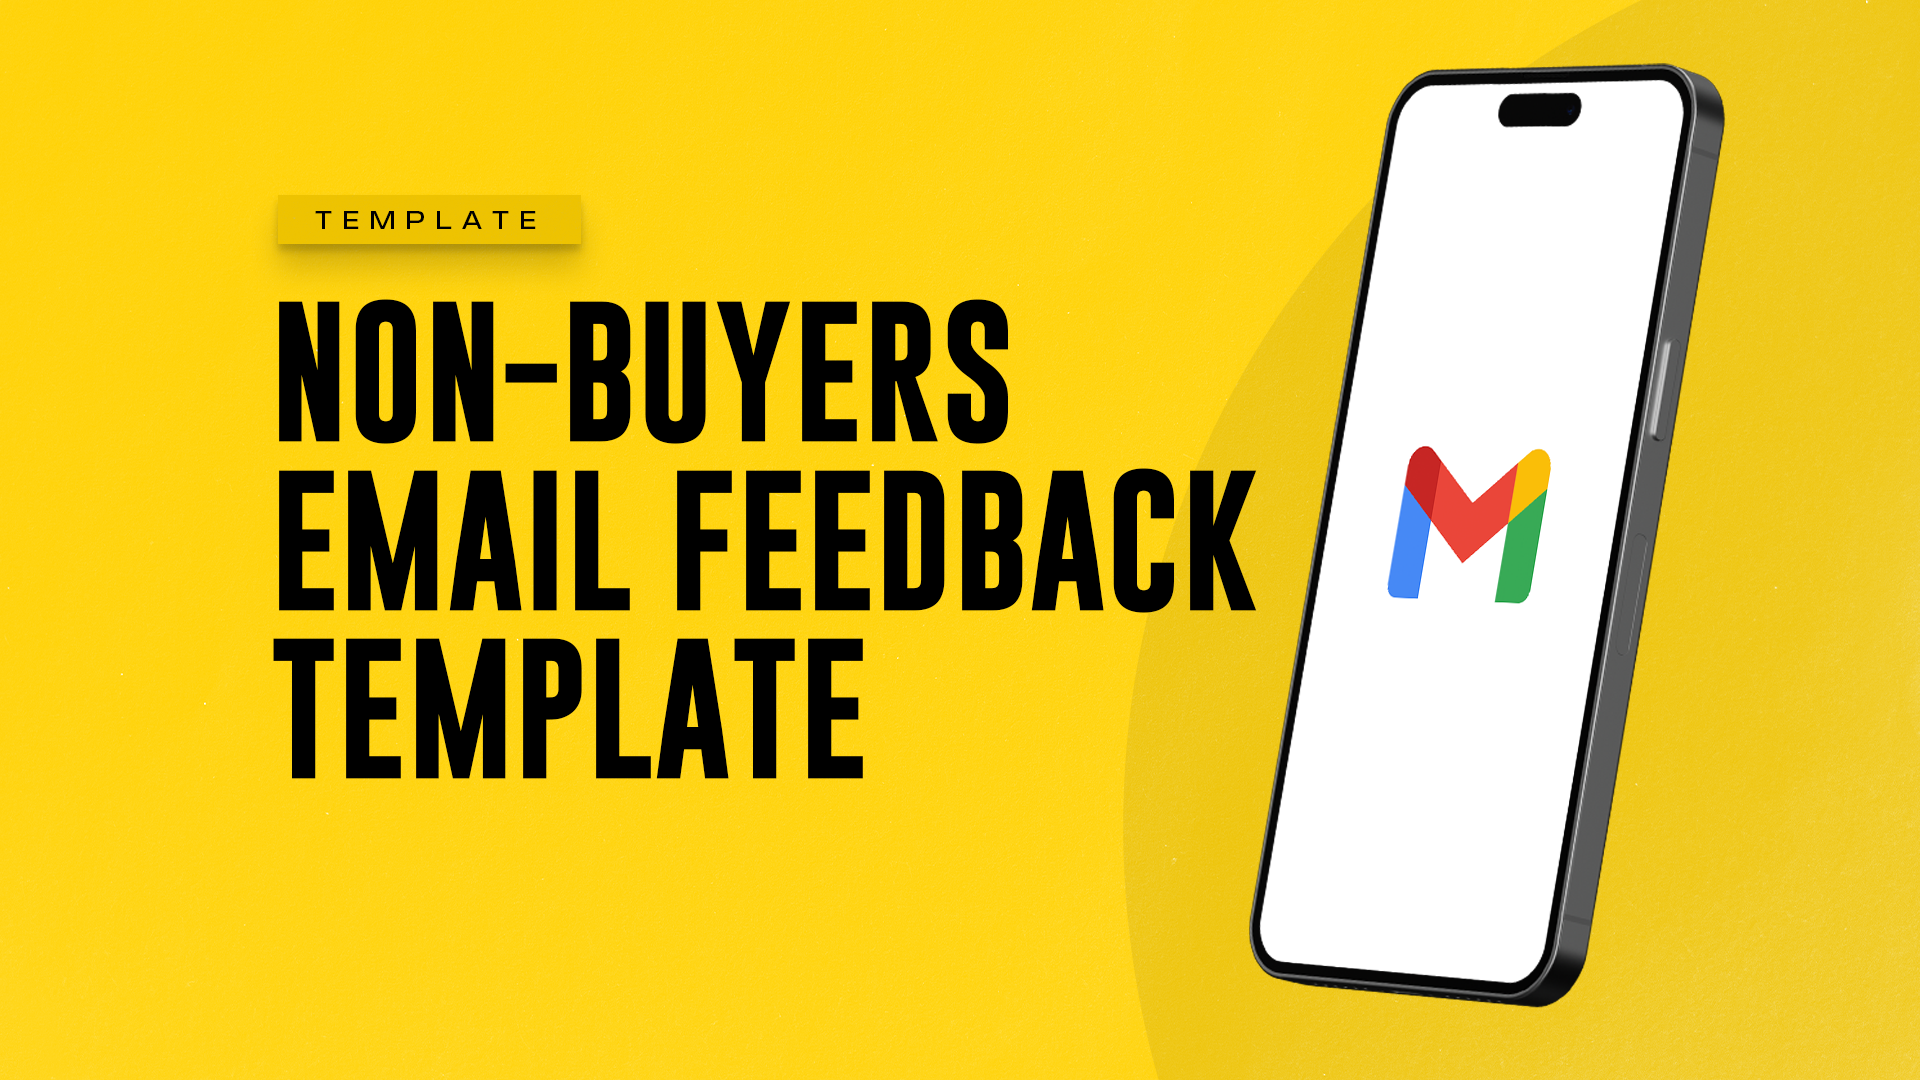 Non-buyers Email Feedback Template